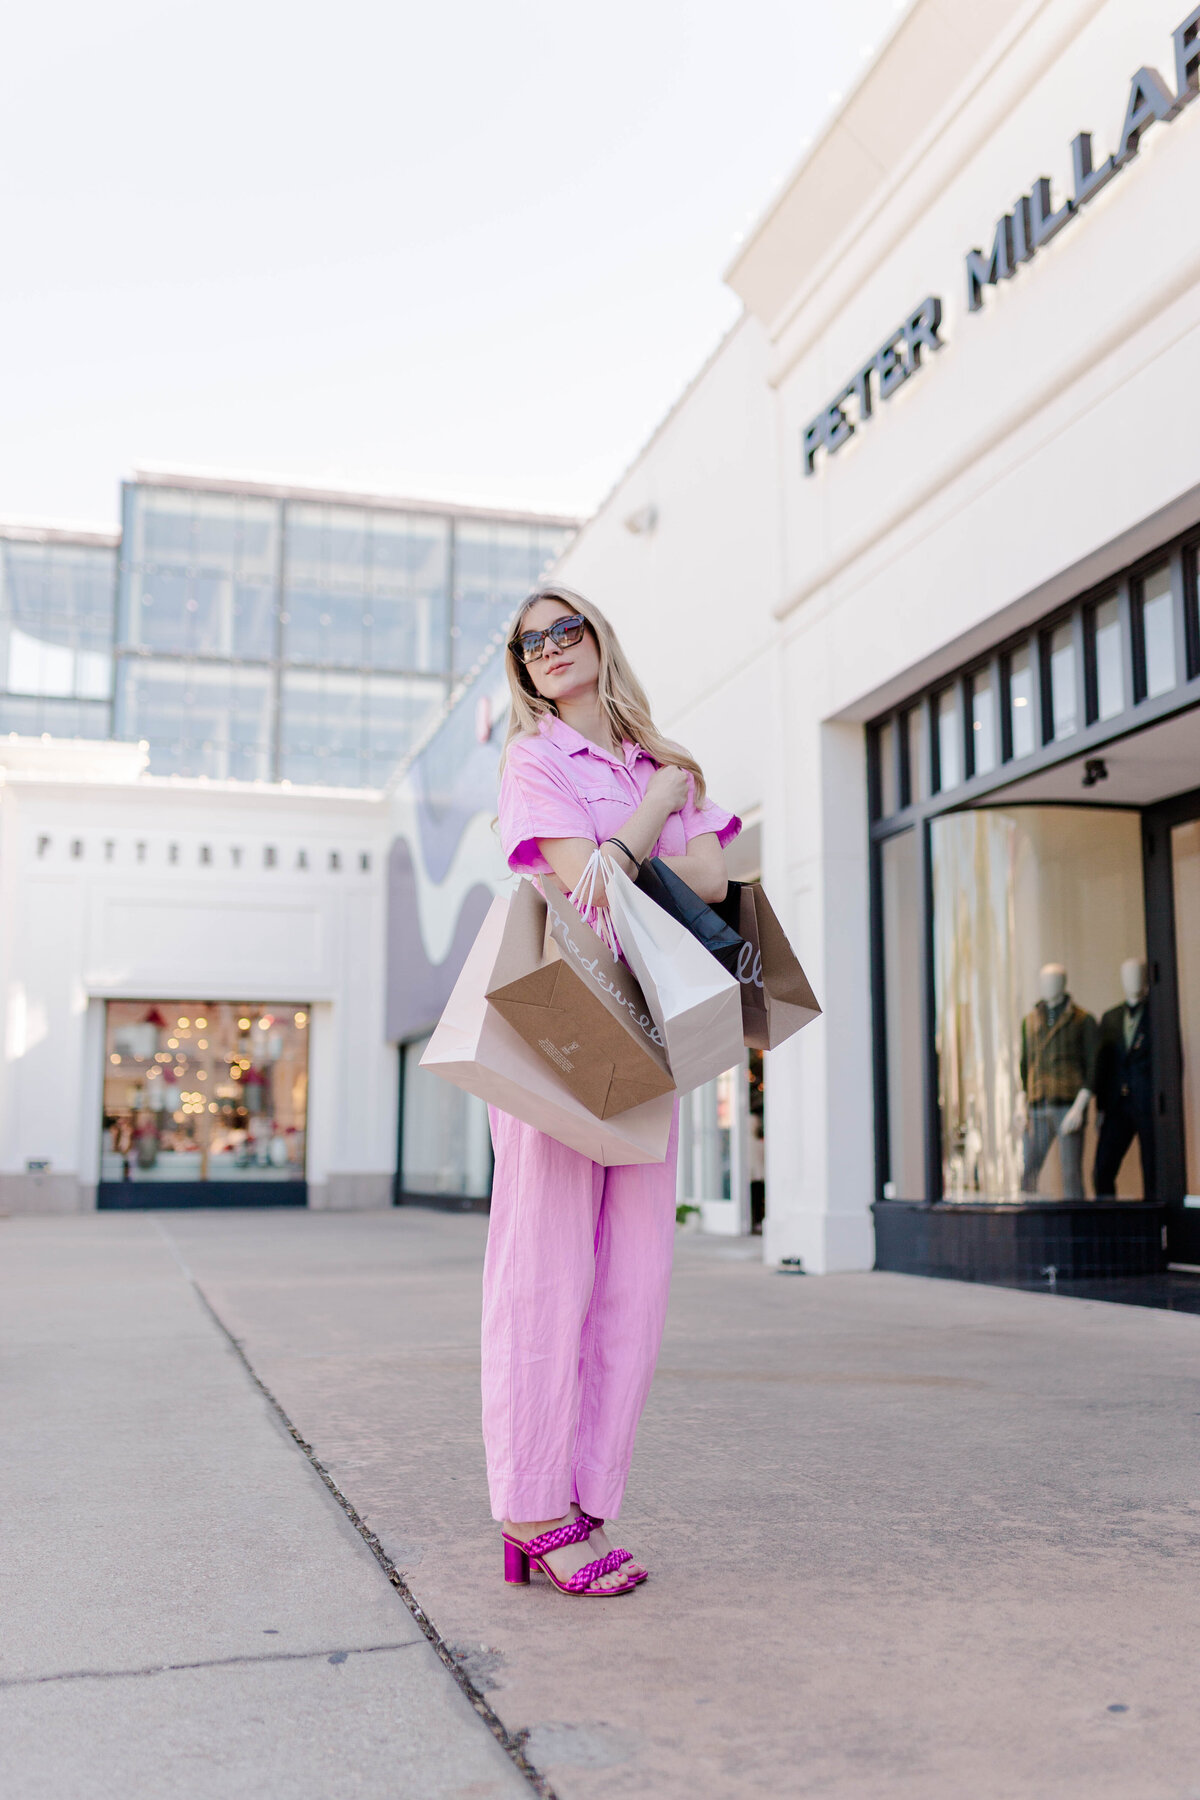 Fashion barbie poses with shopping bags in a pink jumpsuit in front of pottery barn in houston